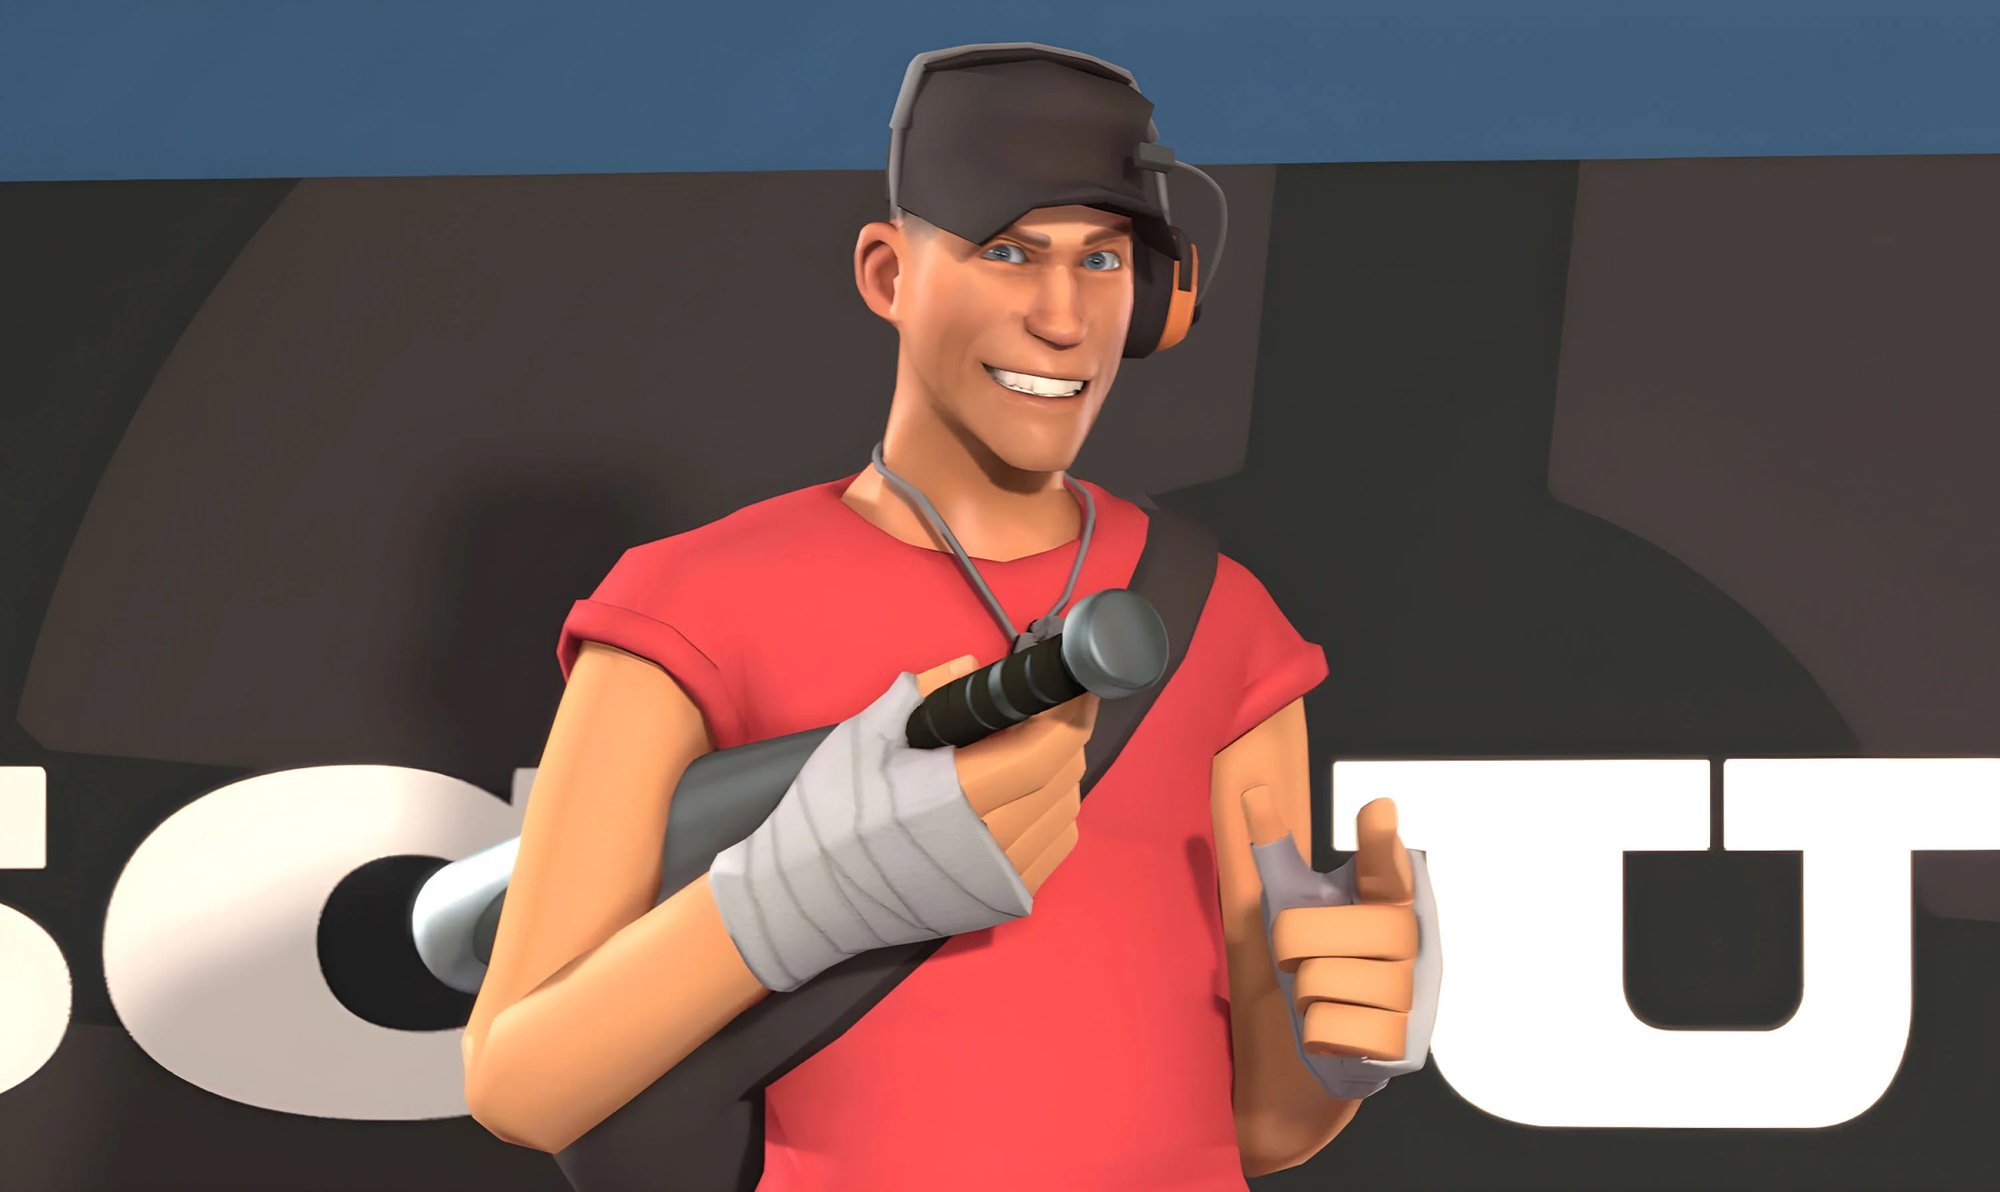 Scout (Team Fortress 2)